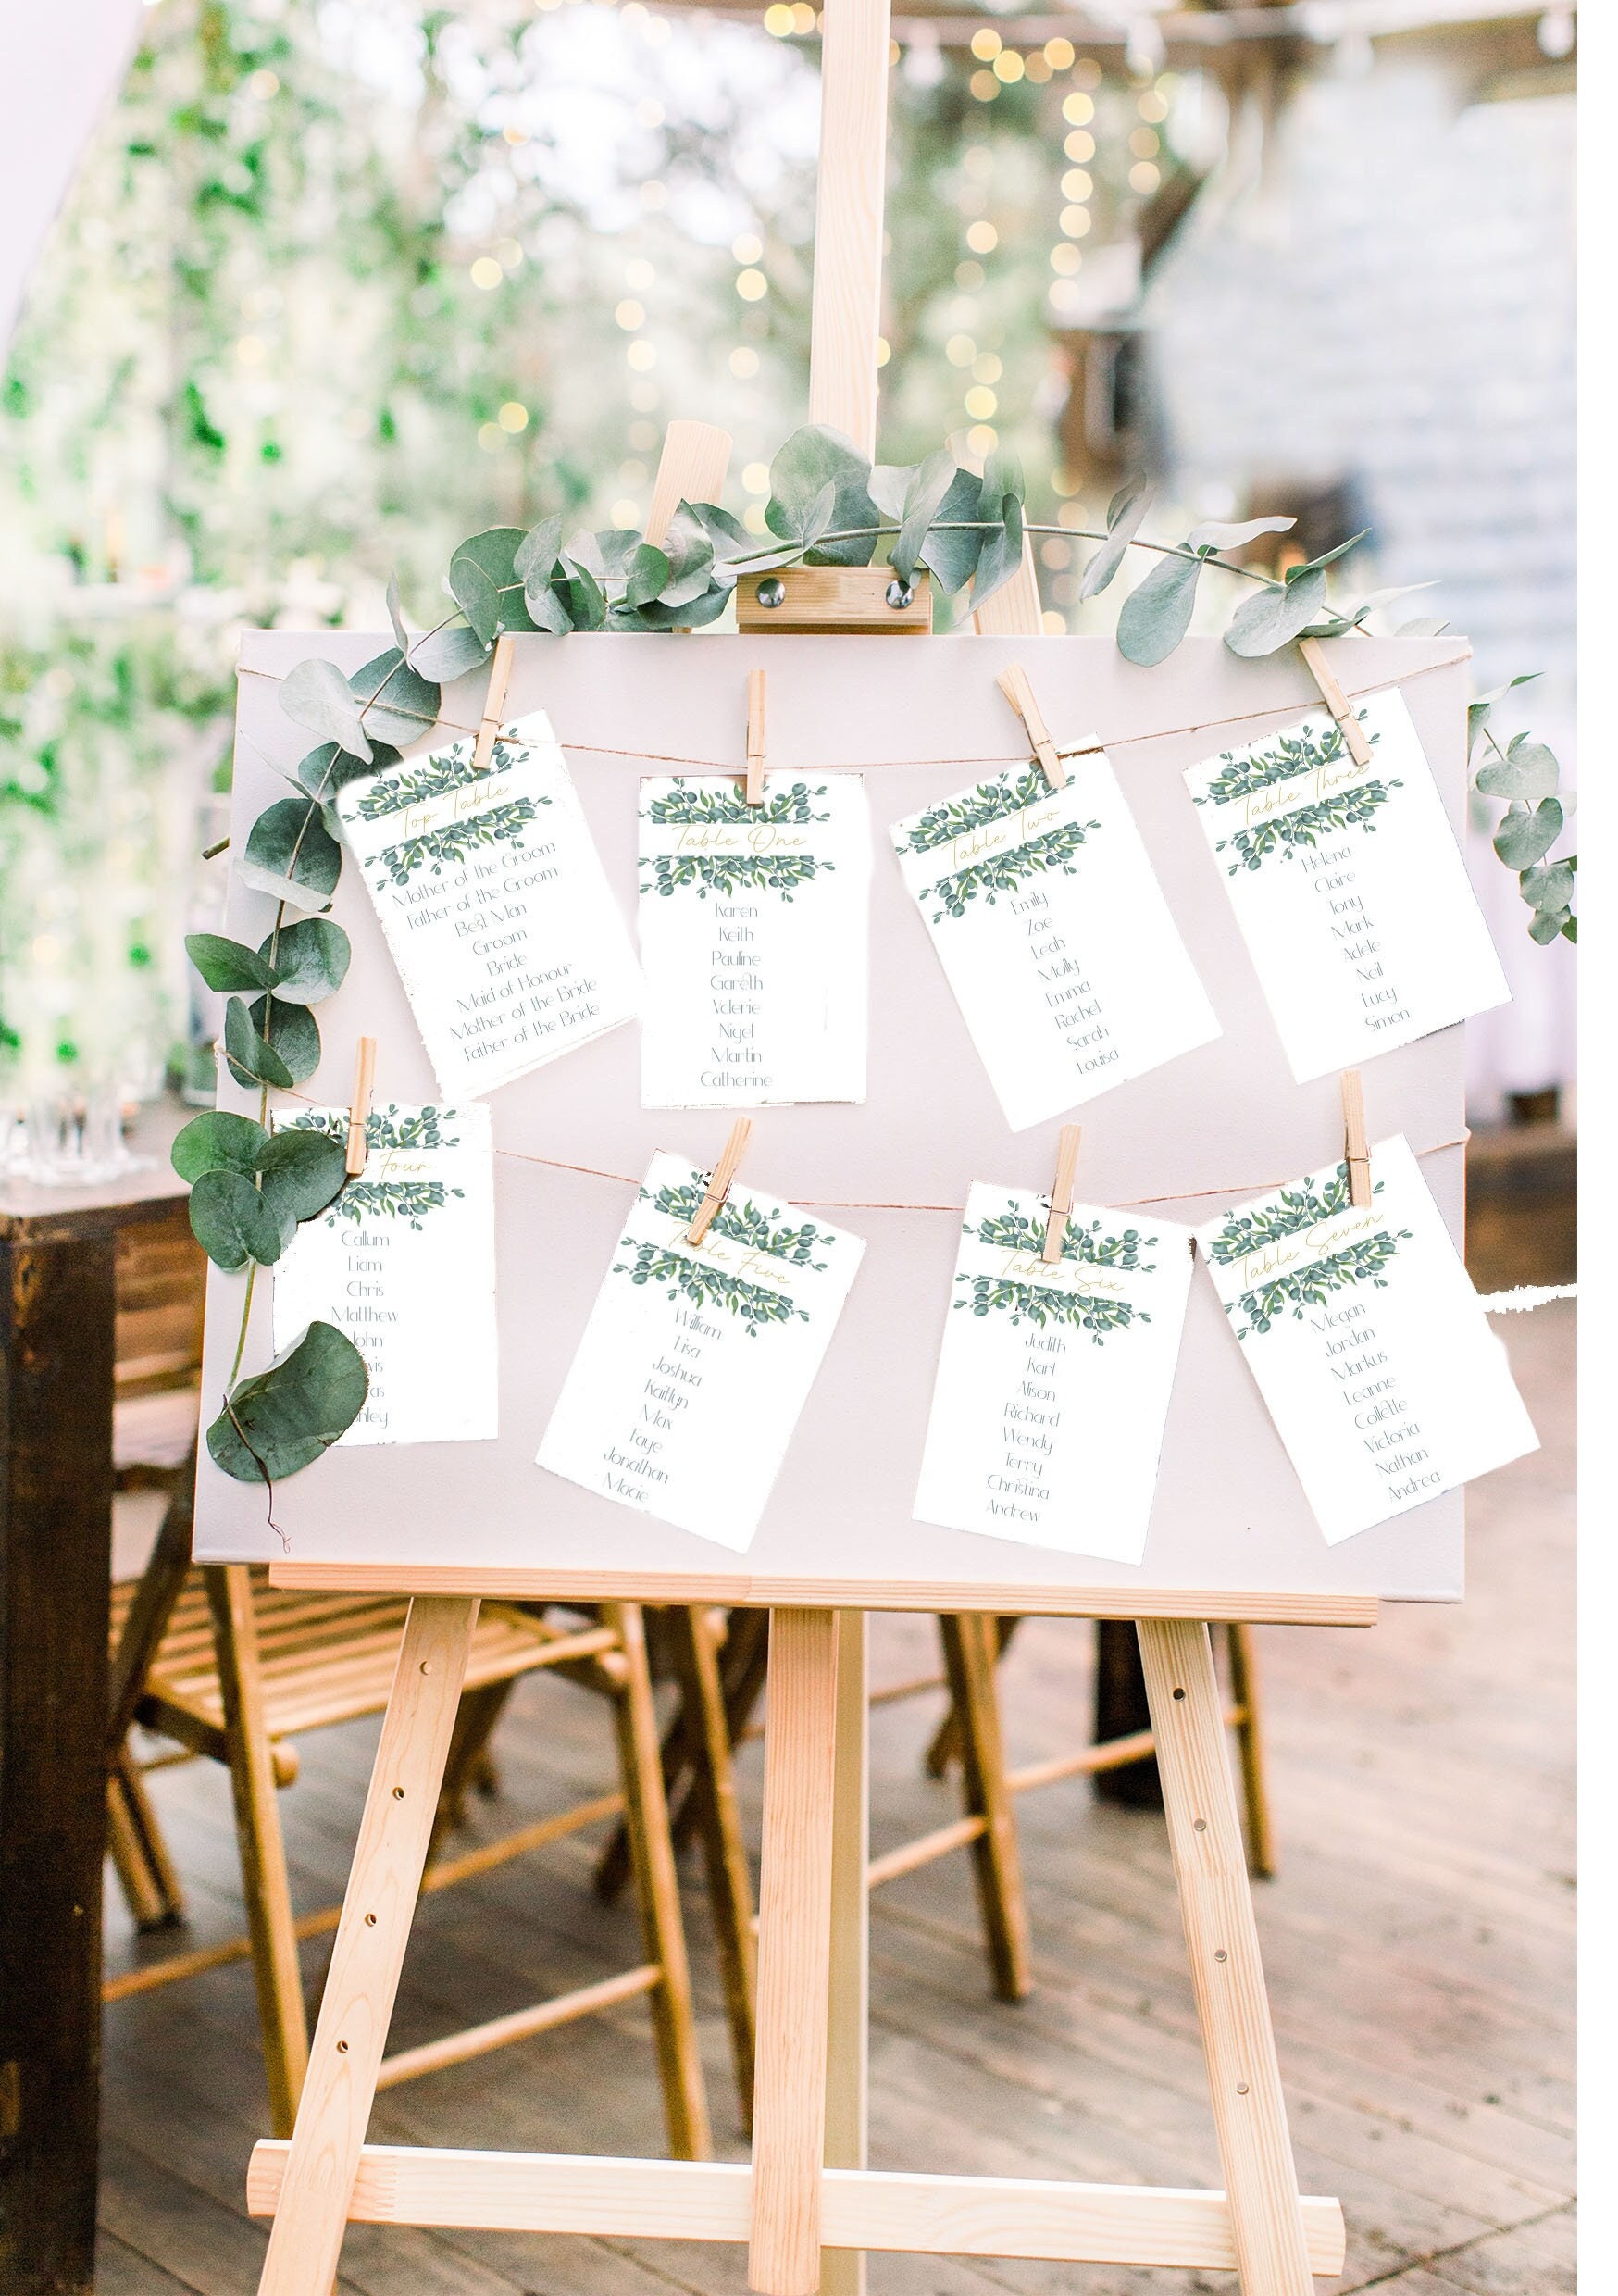 Guest Seats Eucalyptus Greenery Minimalist Wedding Table Plan A1 Fully PRINTED & POSTED Event Personalised Sign RHEA Range Unframed